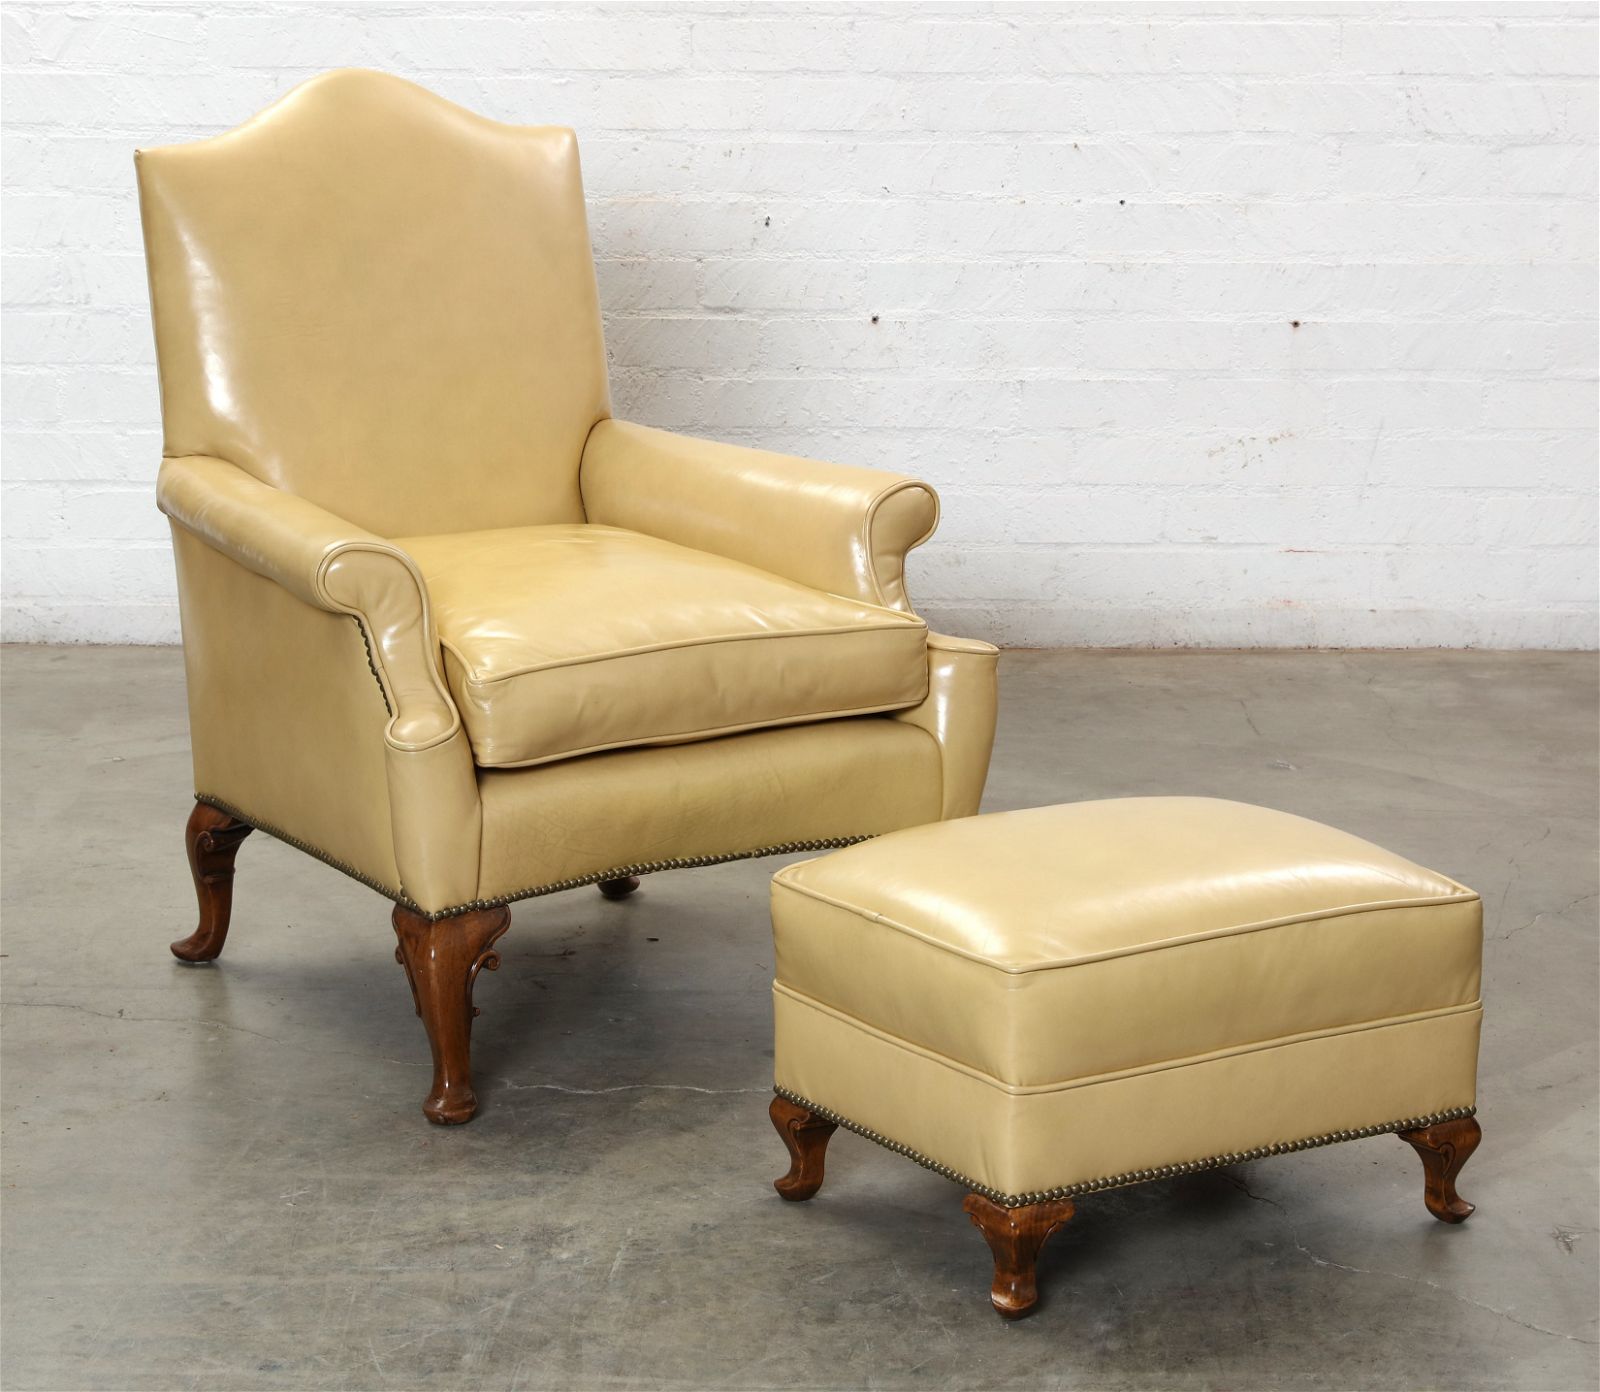 GEORGE II STYLE UPHOLSTERED ARMCHAIR 2fb2b8a